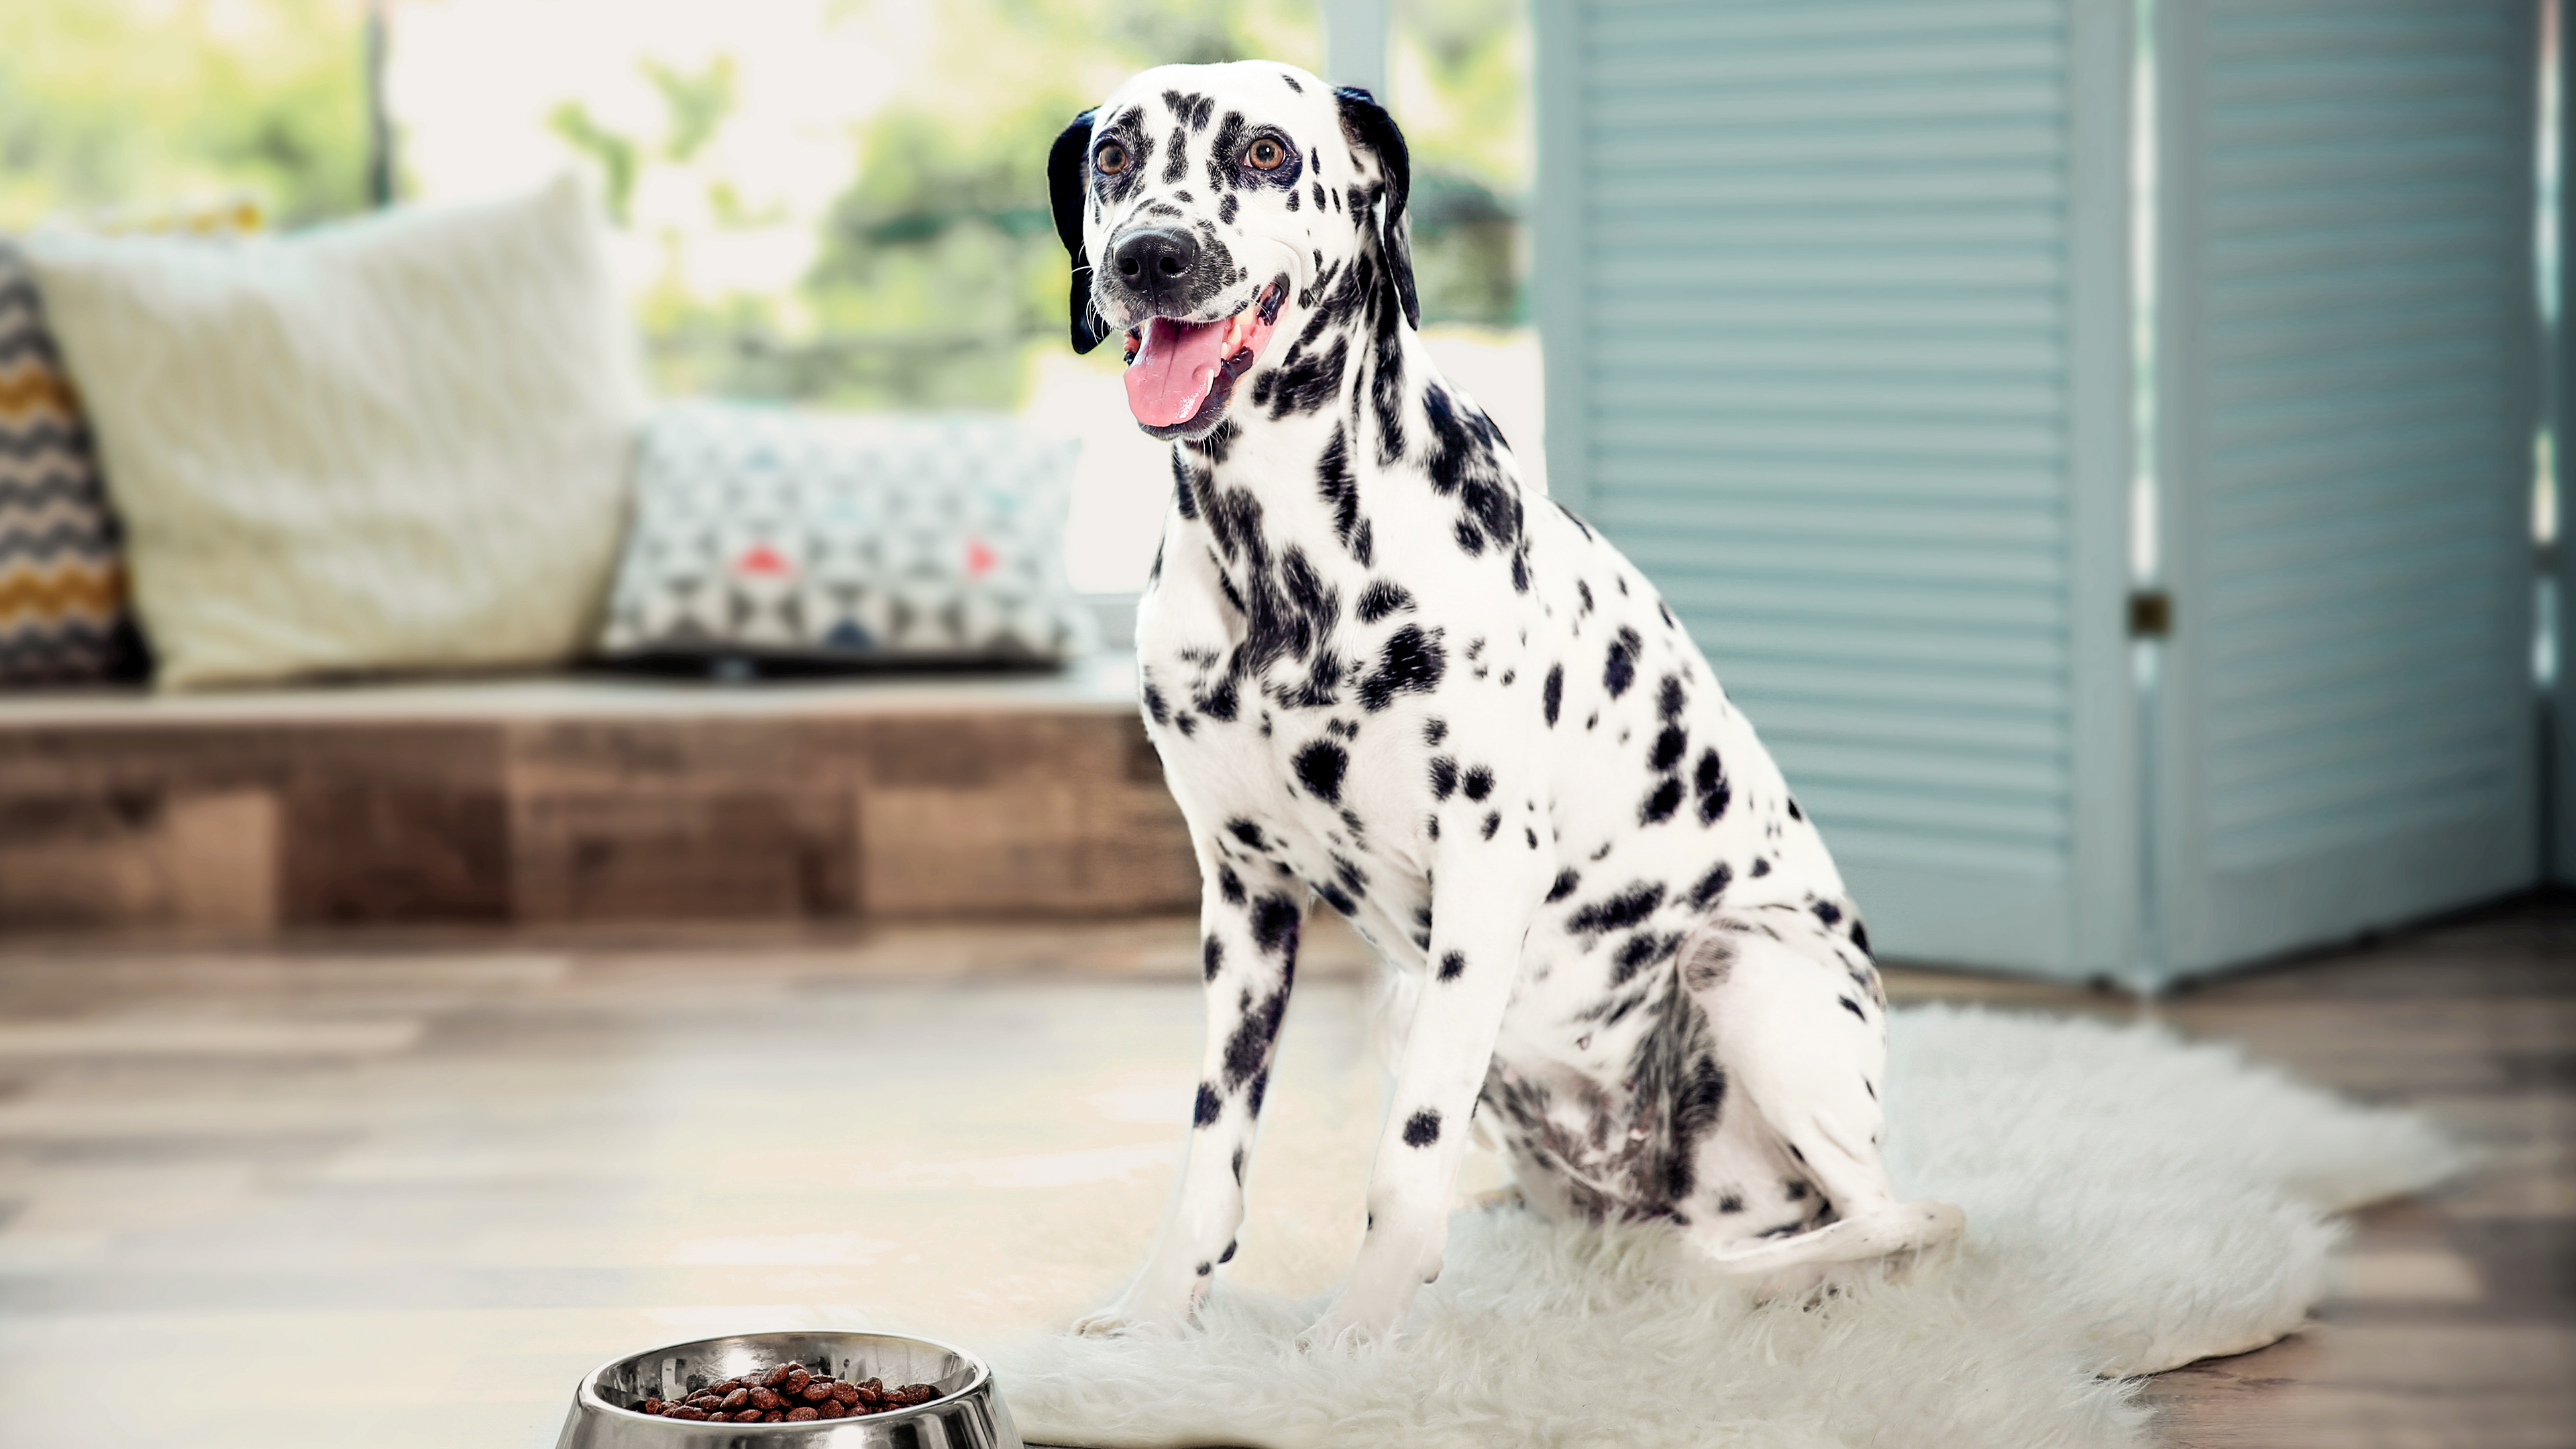 Dalmatian adult sitting indoors on a white rug next to a stainless steel feeding bowl